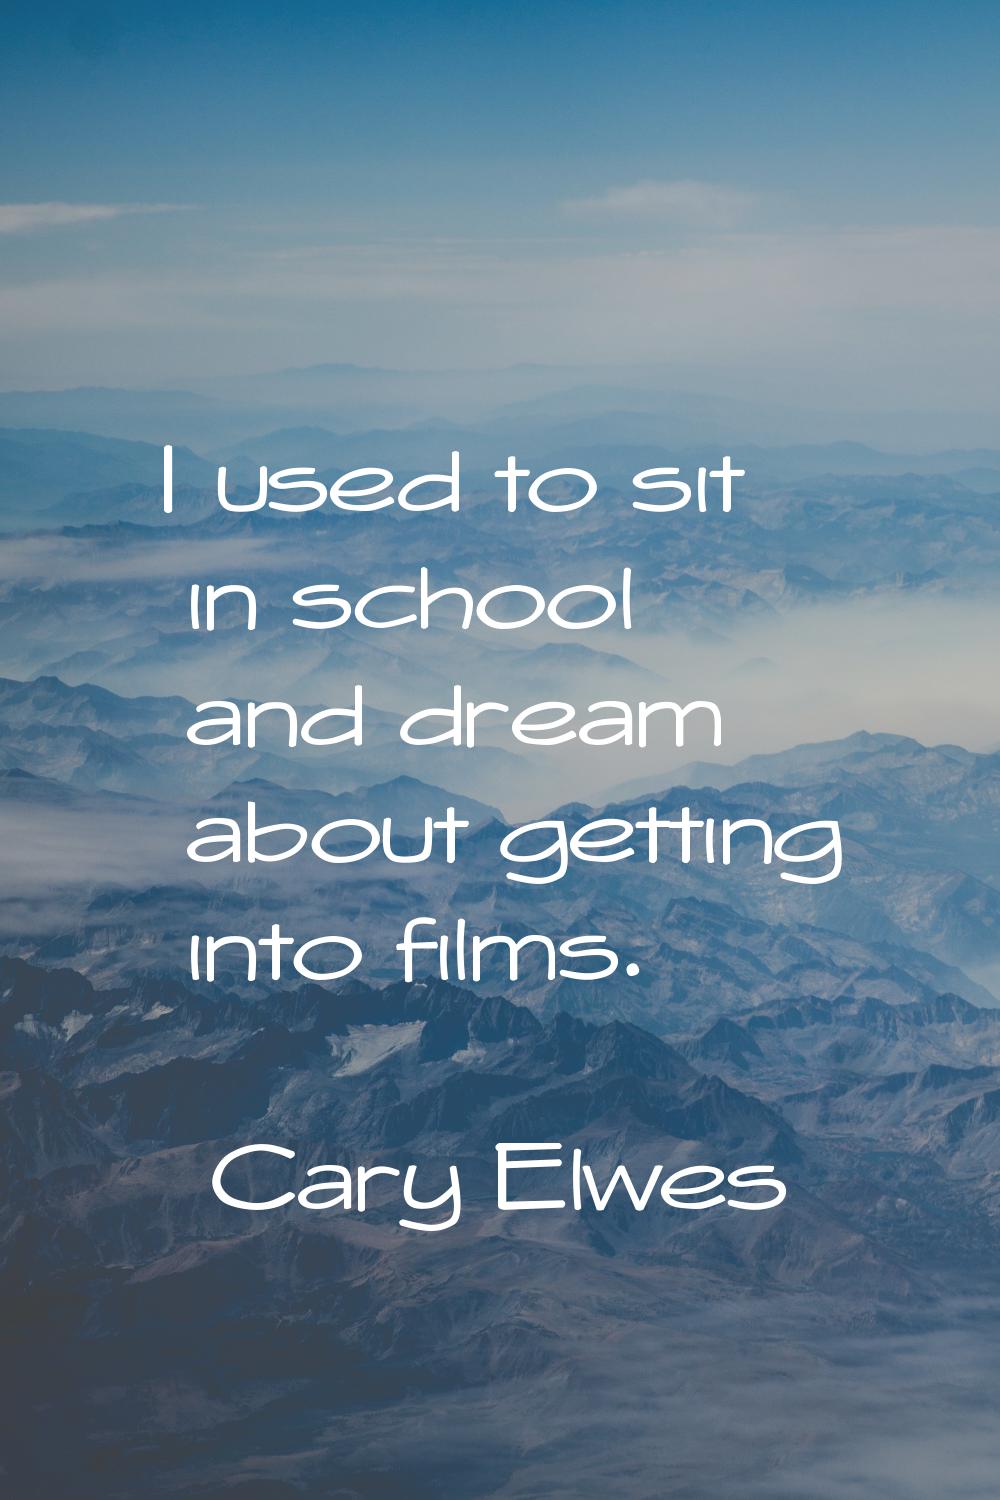 I used to sit in school and dream about getting into films.